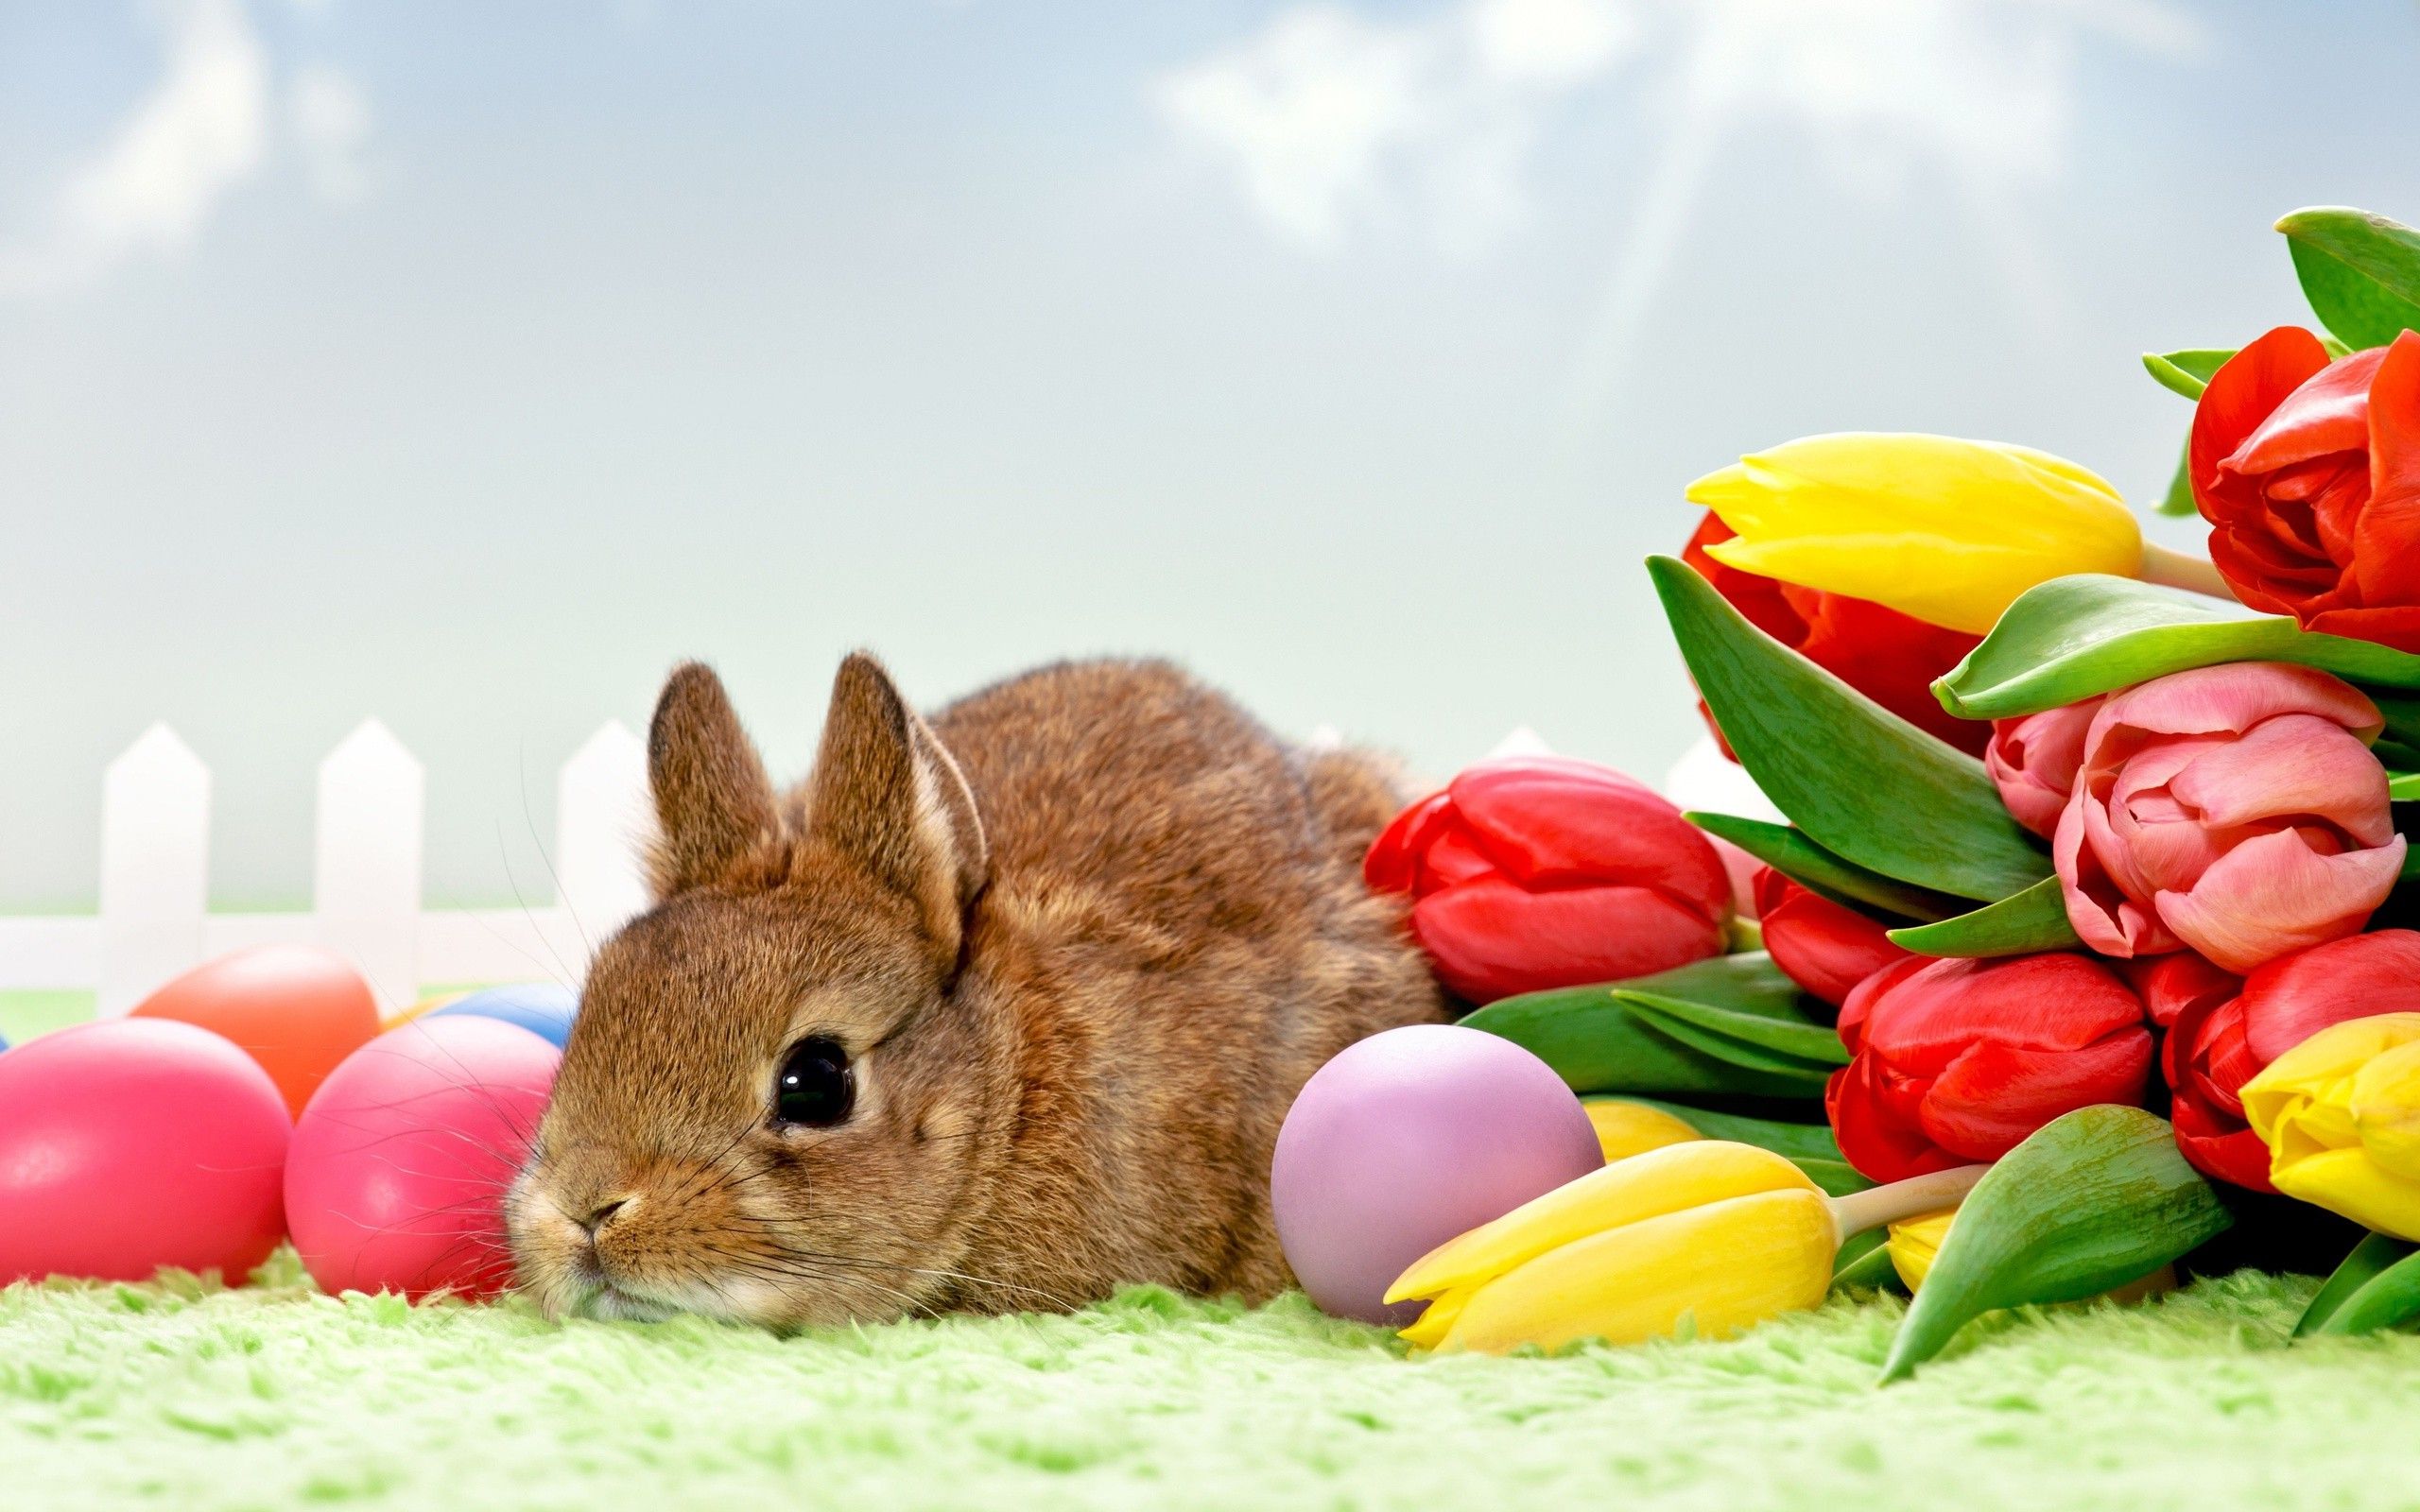 tulips, Flowers, Rabbits, Eggs, Animals, Easter Wallpaper HD